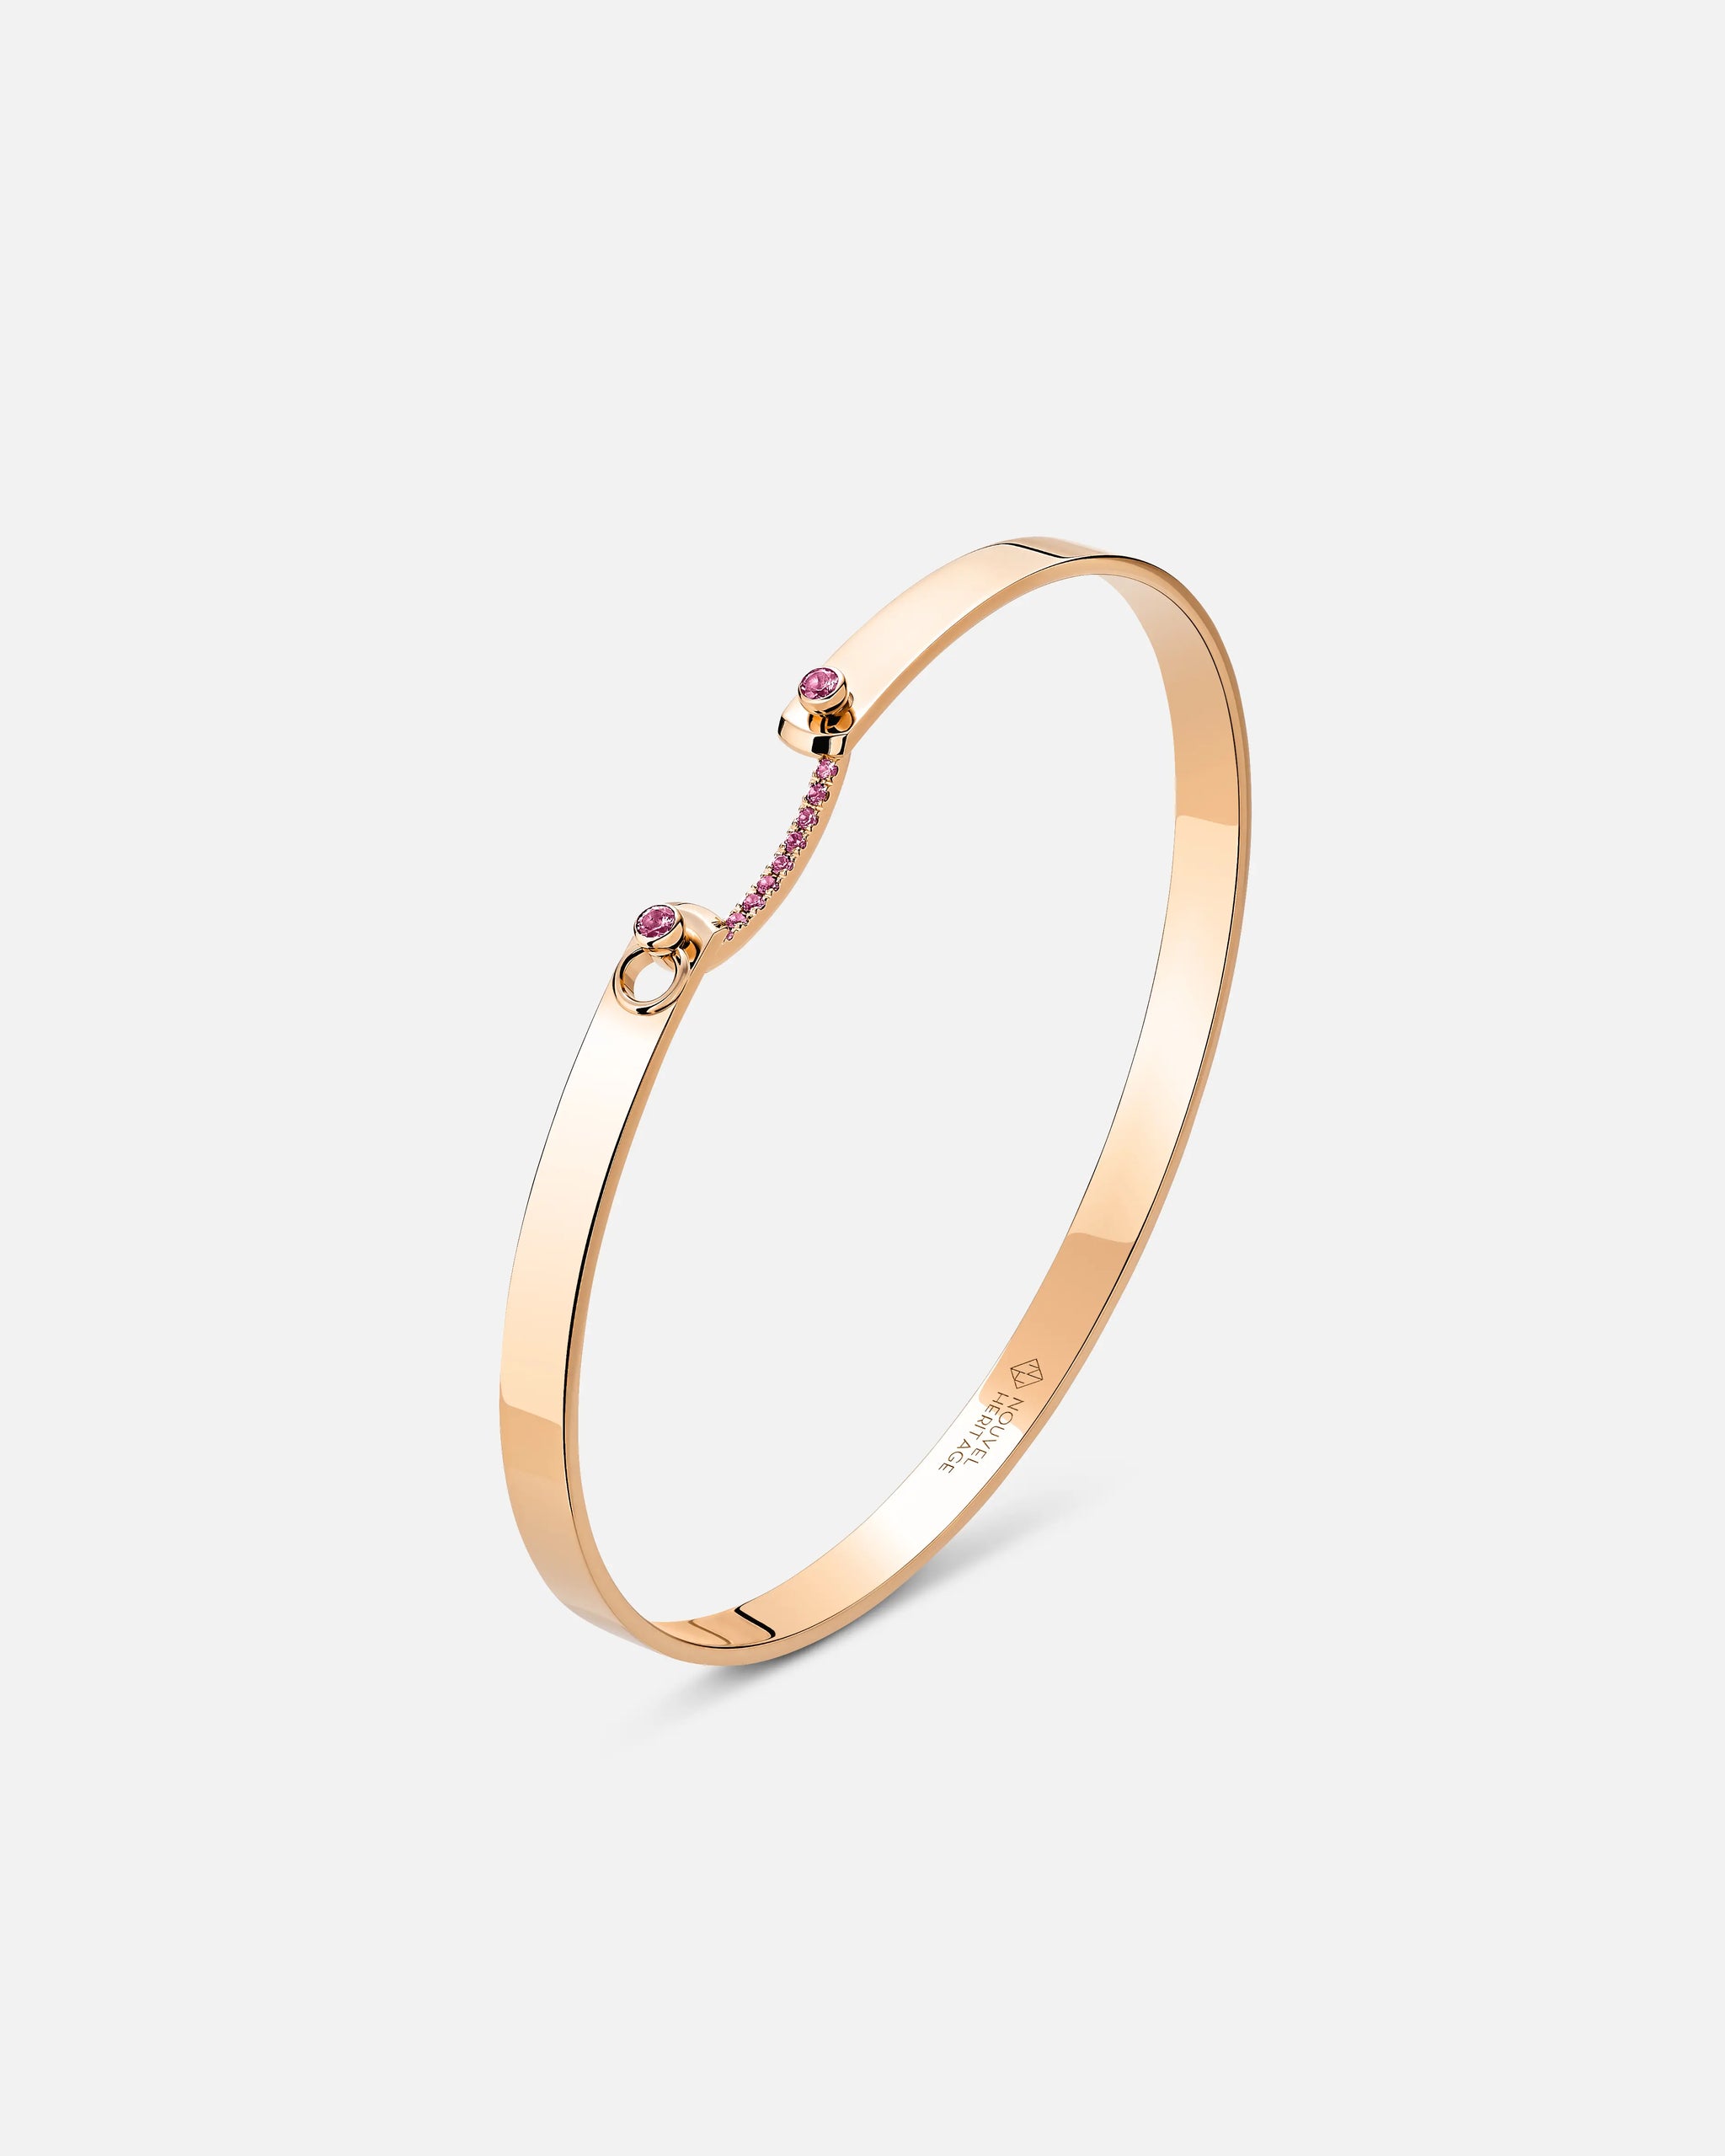 Baby Pink Mood Bangle in Rose Gold - 1 - Nouvel Heritage